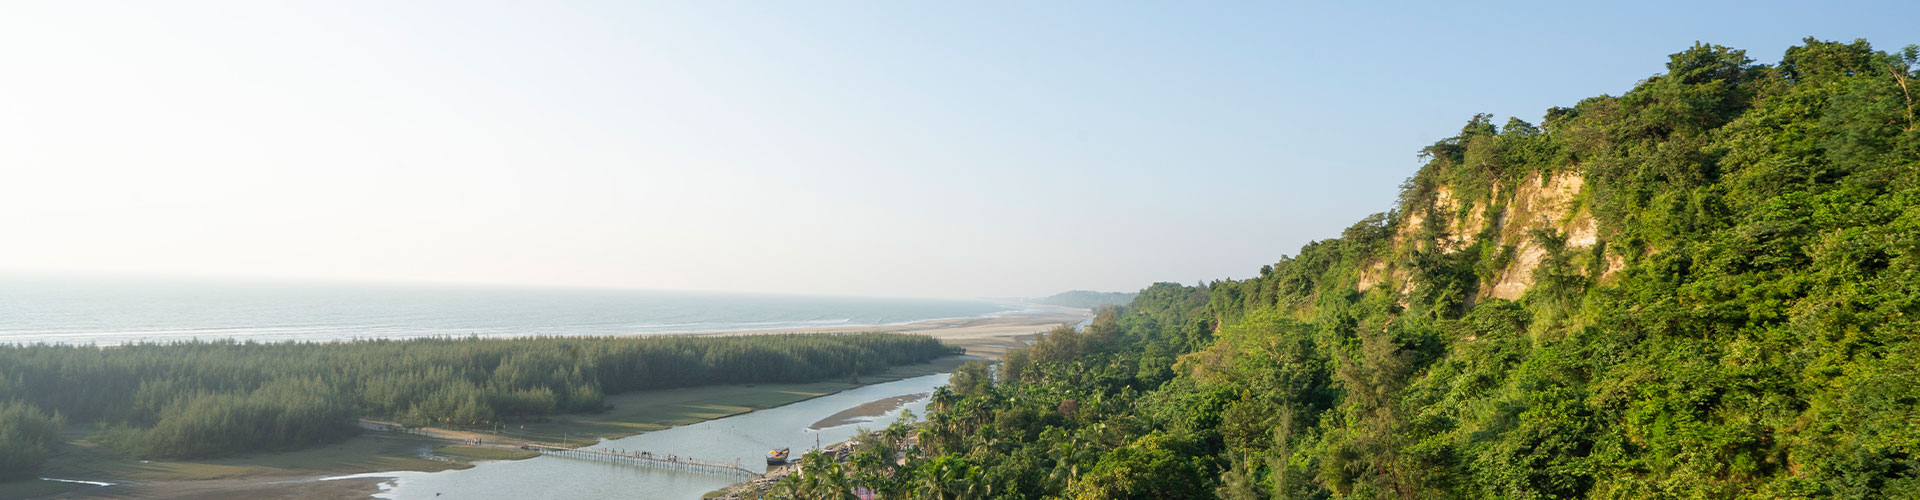 Sea and Mountain View at Cox's Bazar